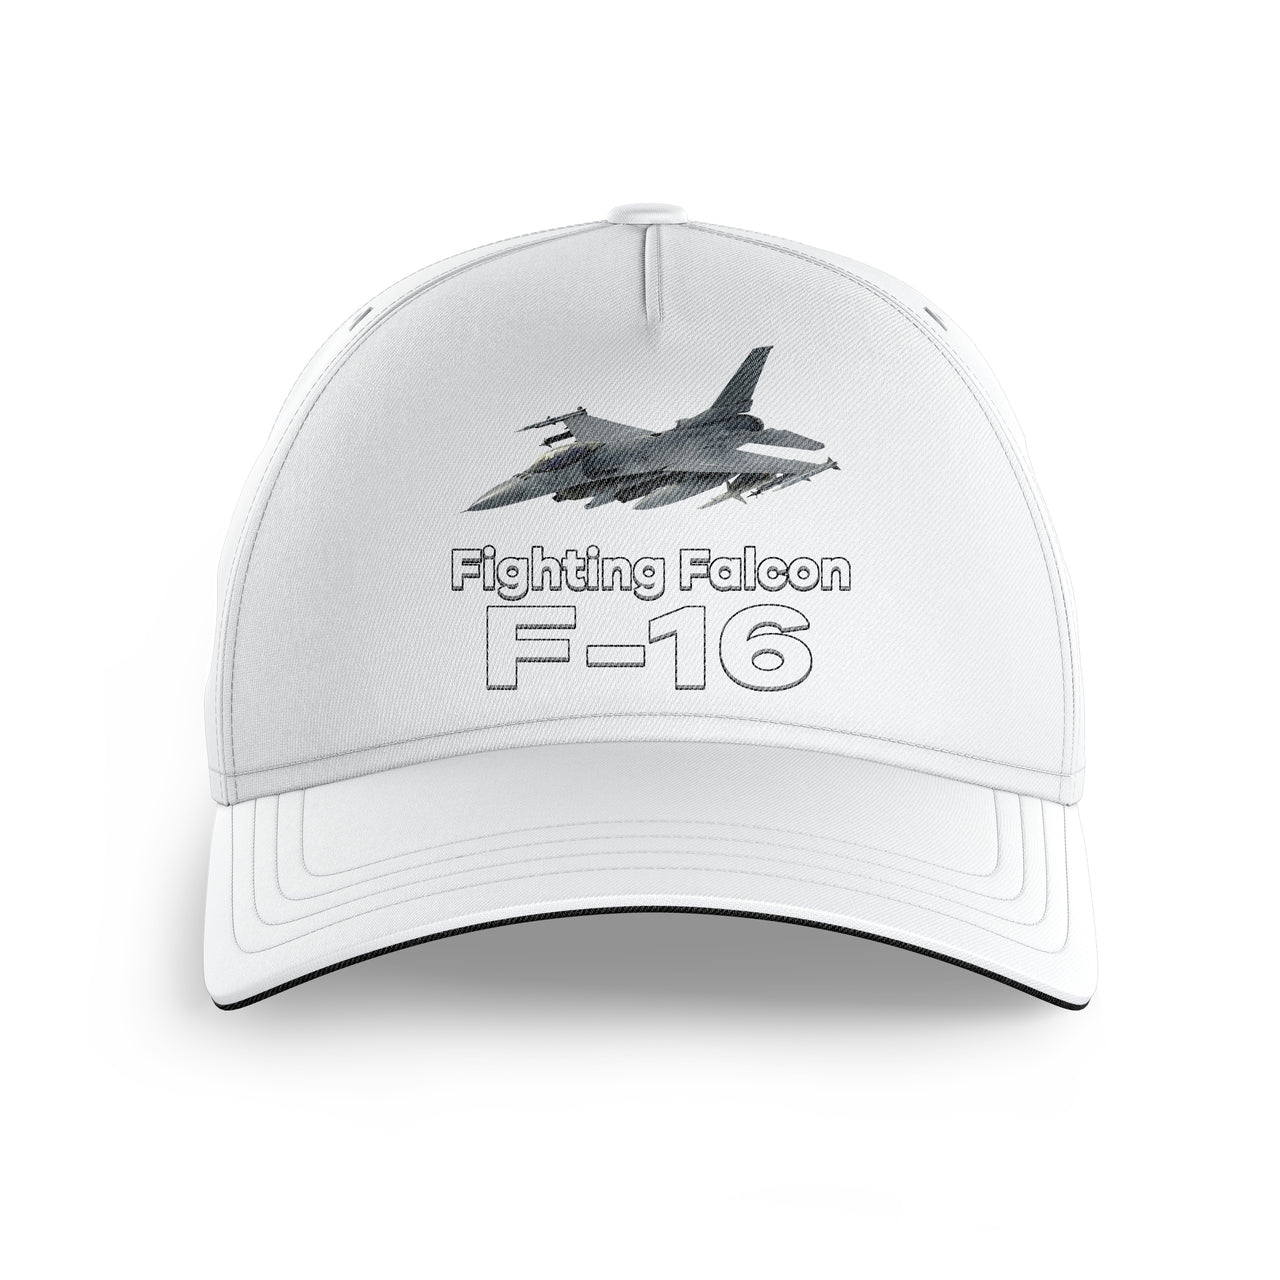 The Fighting Falcon F16 Printed Hats